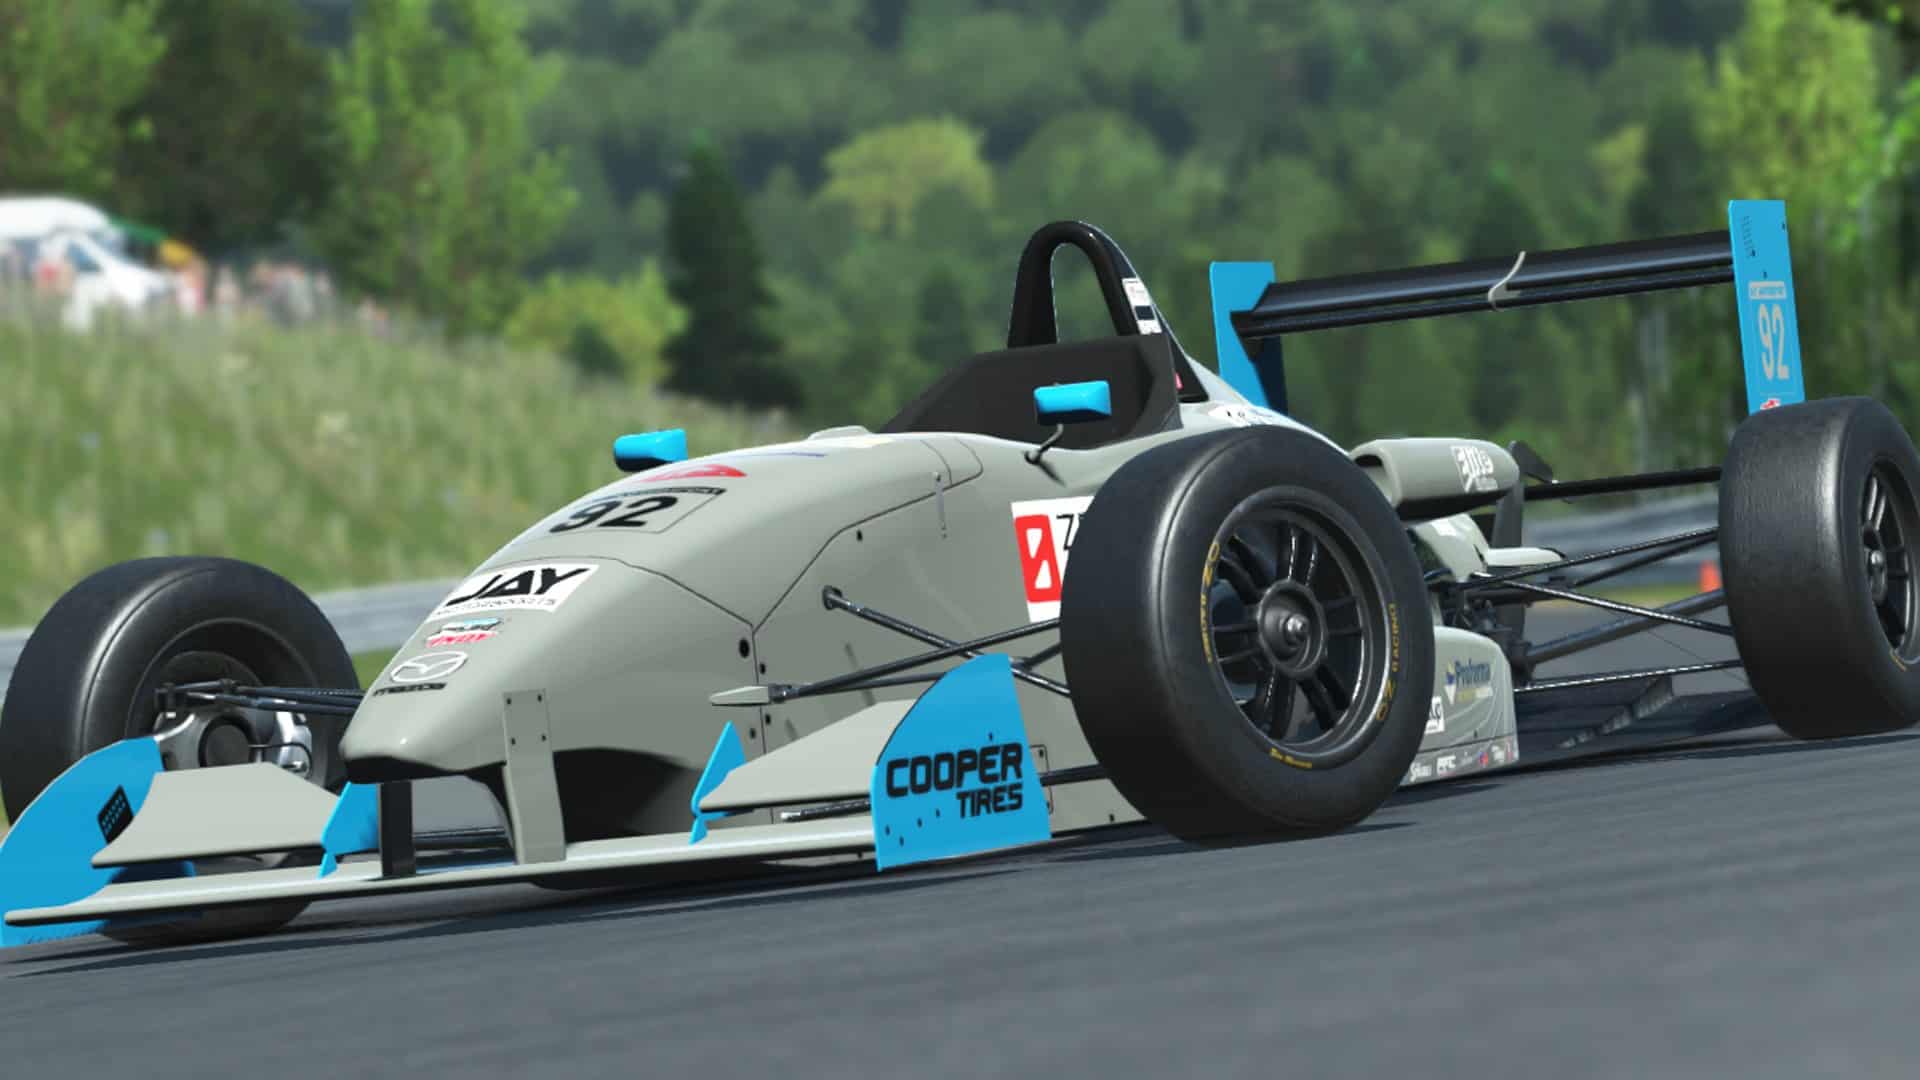 July Roadmap Update for rFactor 2 teases new and updated content